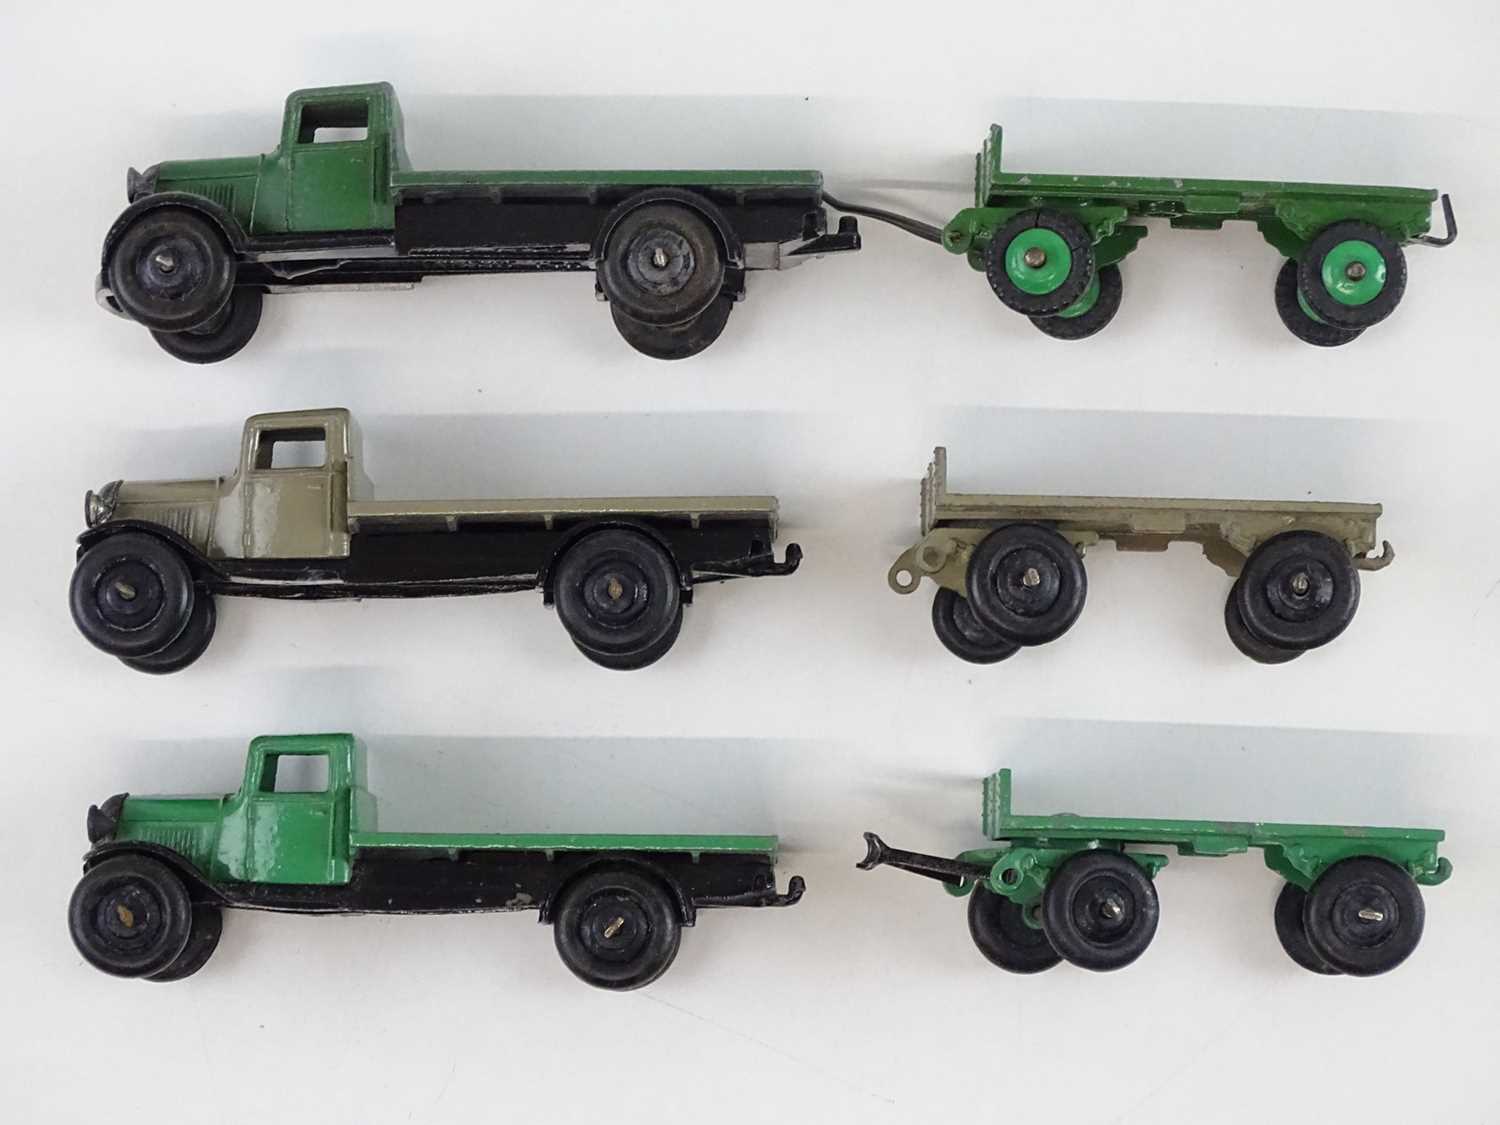 A DINKY 25T Flat Truck & Trailer trade box complete with 3 examples of the model, 2 in green, 1 in - Image 6 of 9